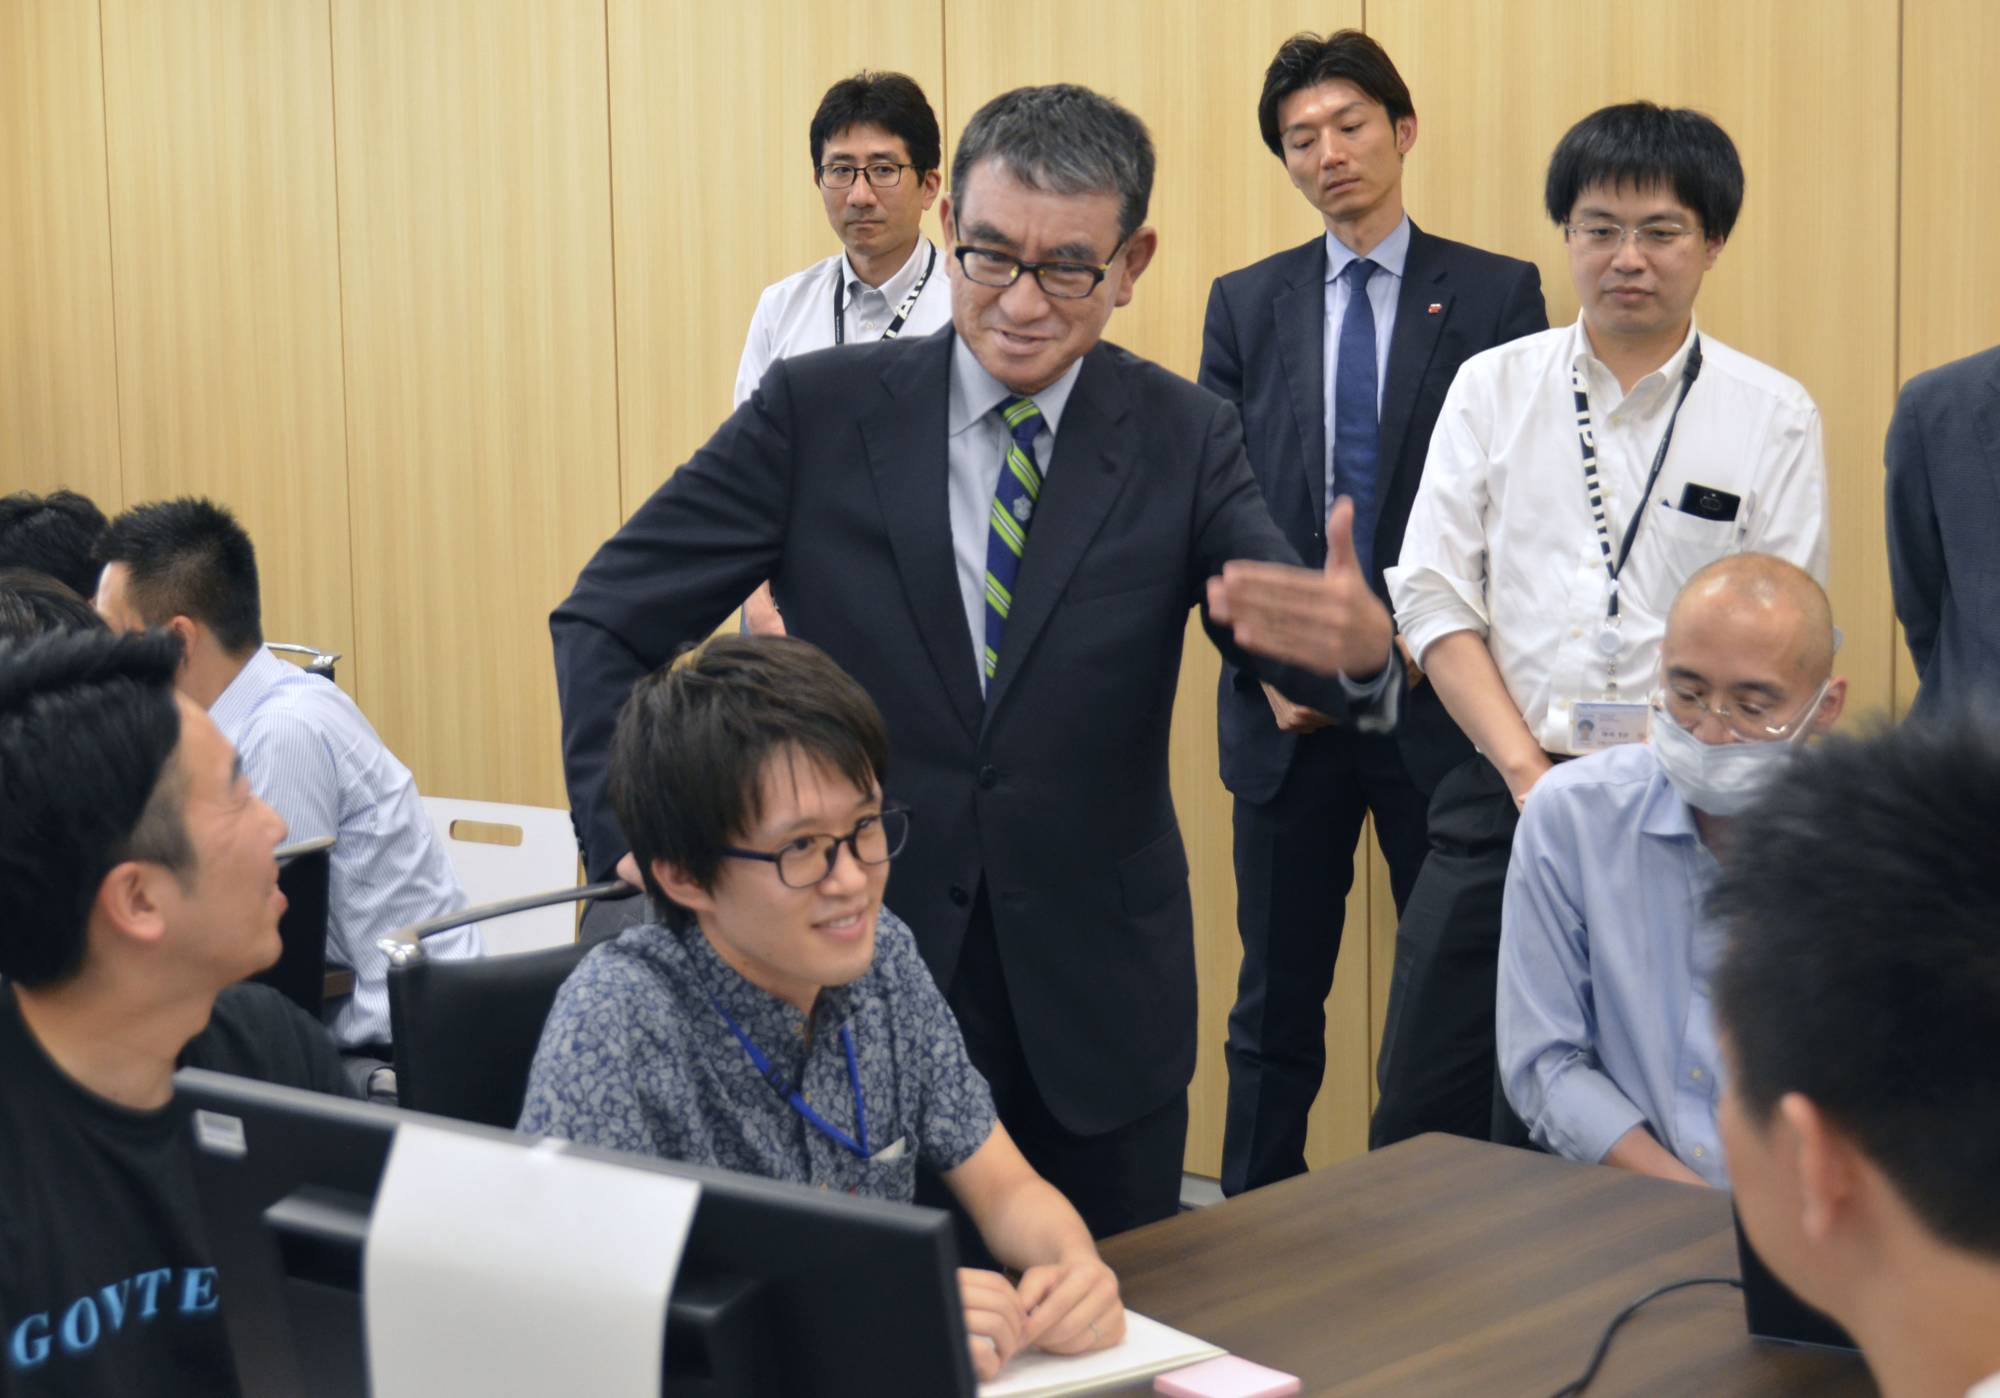 Digital Minister Taro Kono attends an event in Tokyo in June. How the woes over My Number will affect Kono's standing as a candidate for prime minister in a potential post-Kishida era remains to be seen. | KYODO